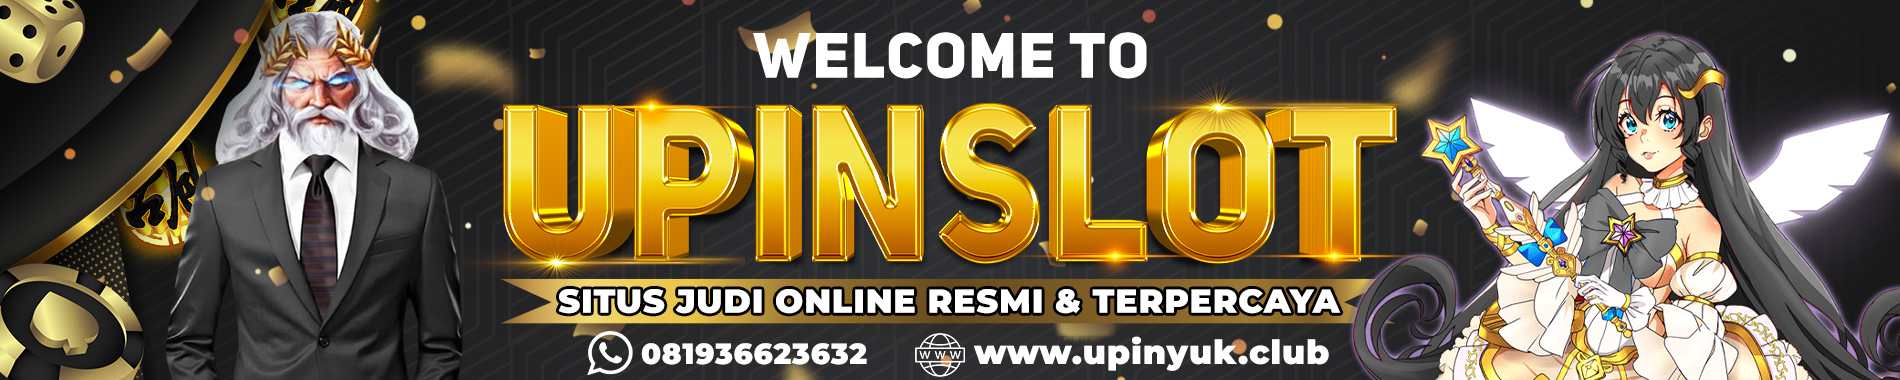 Welcome to upinslot